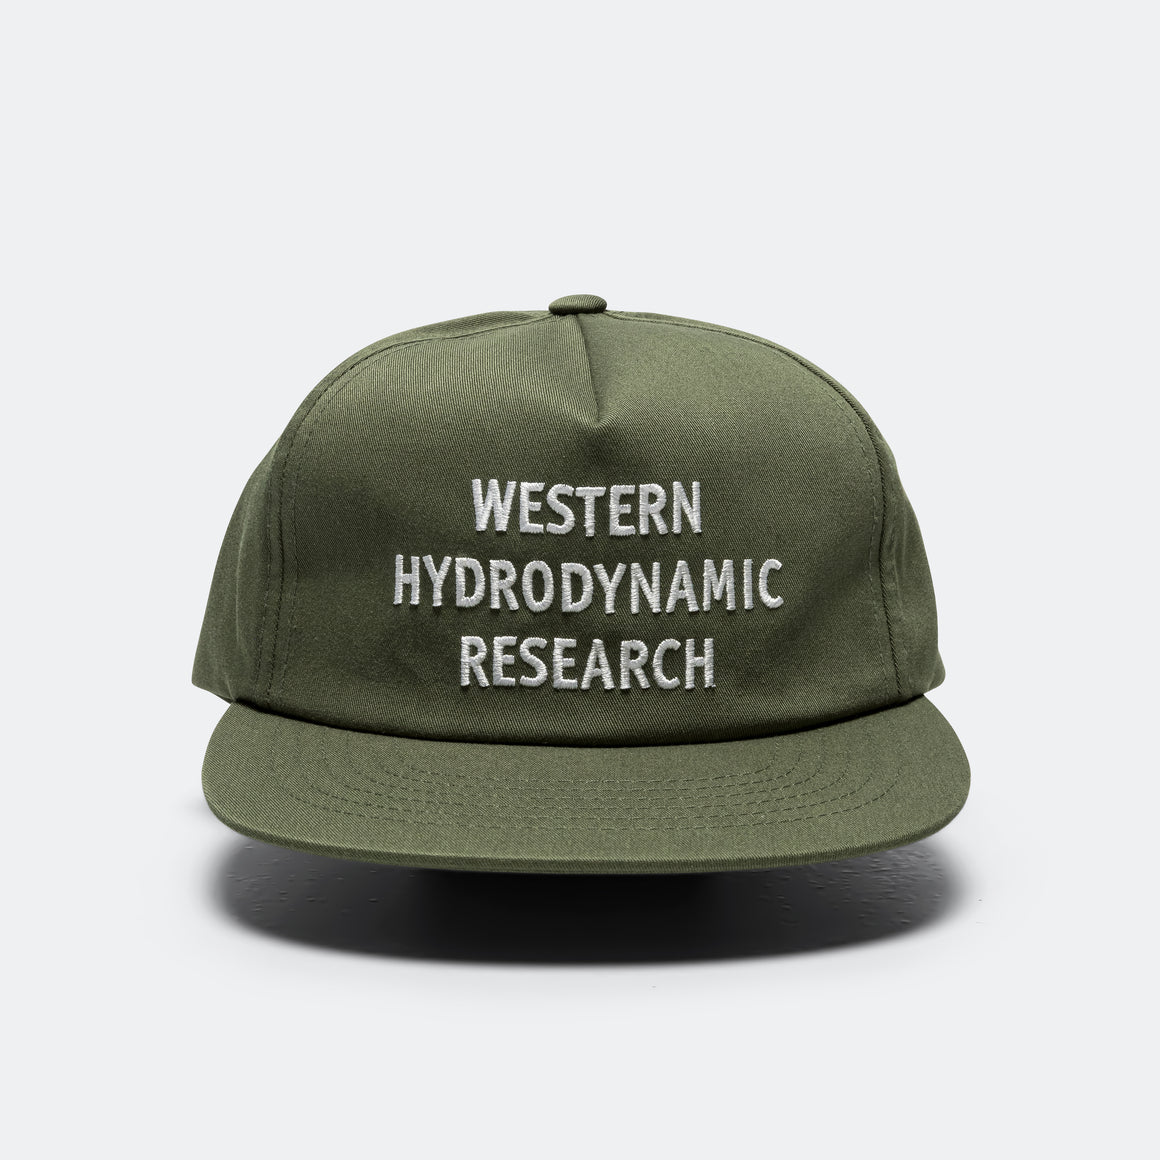 Western Hydrodynamic Research - Promotional Hat - Green Olive - UP THERE